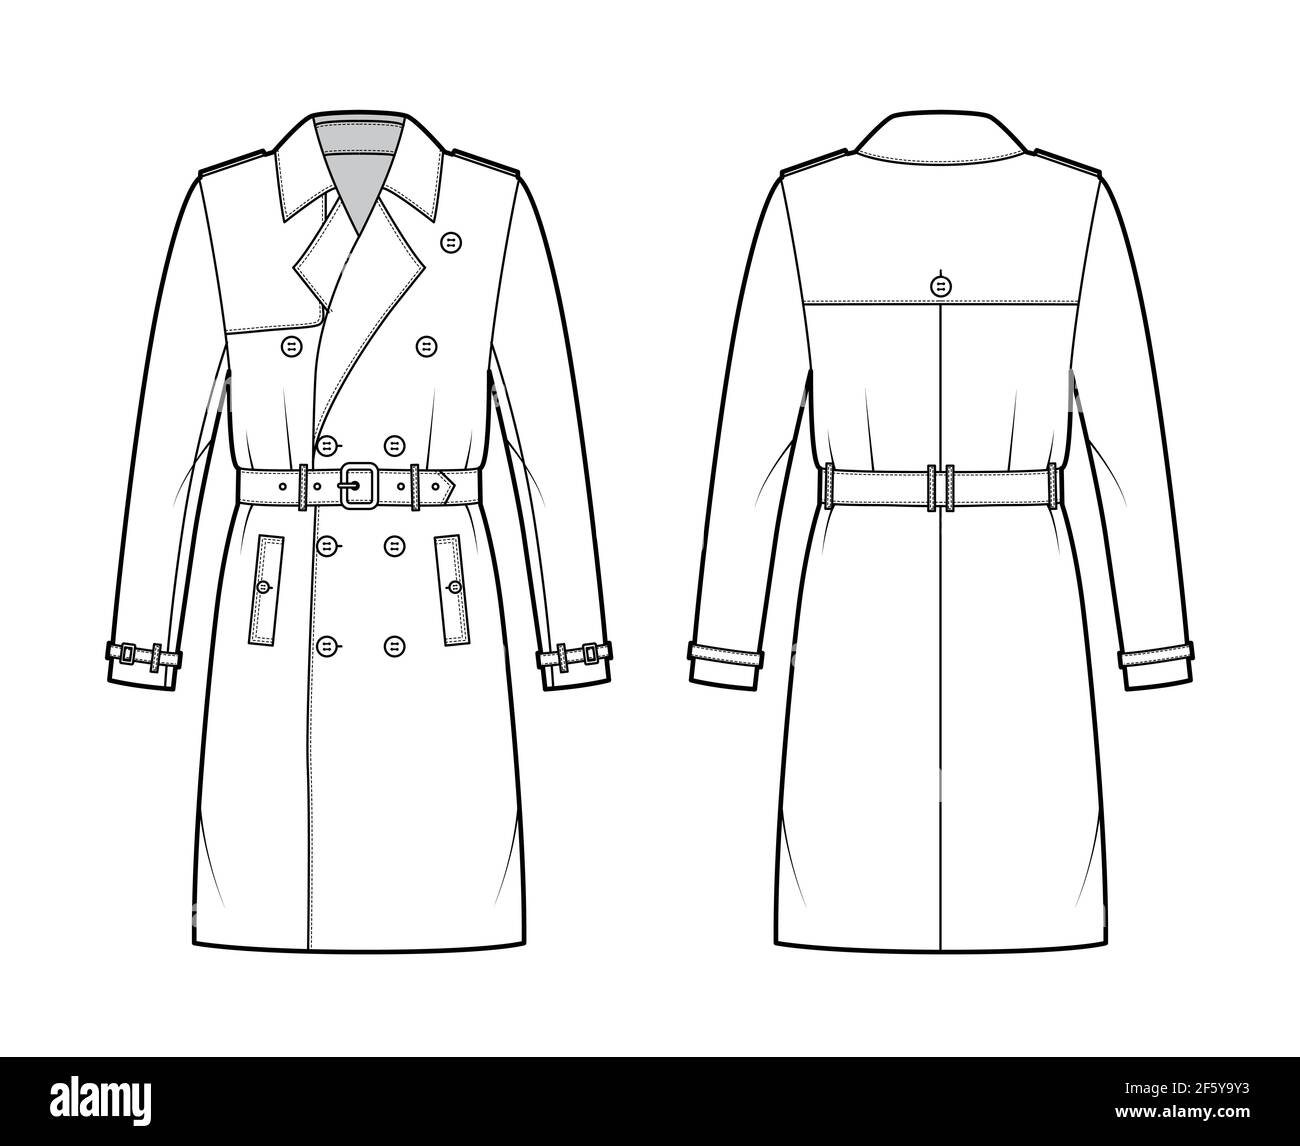 Trench coat technical fashion illustration with belt, double breasted, long sleeves, knee length, storm flap. Flat jacket template front, back, white style. Women, men, unisex top CAD mockup Stock Vector